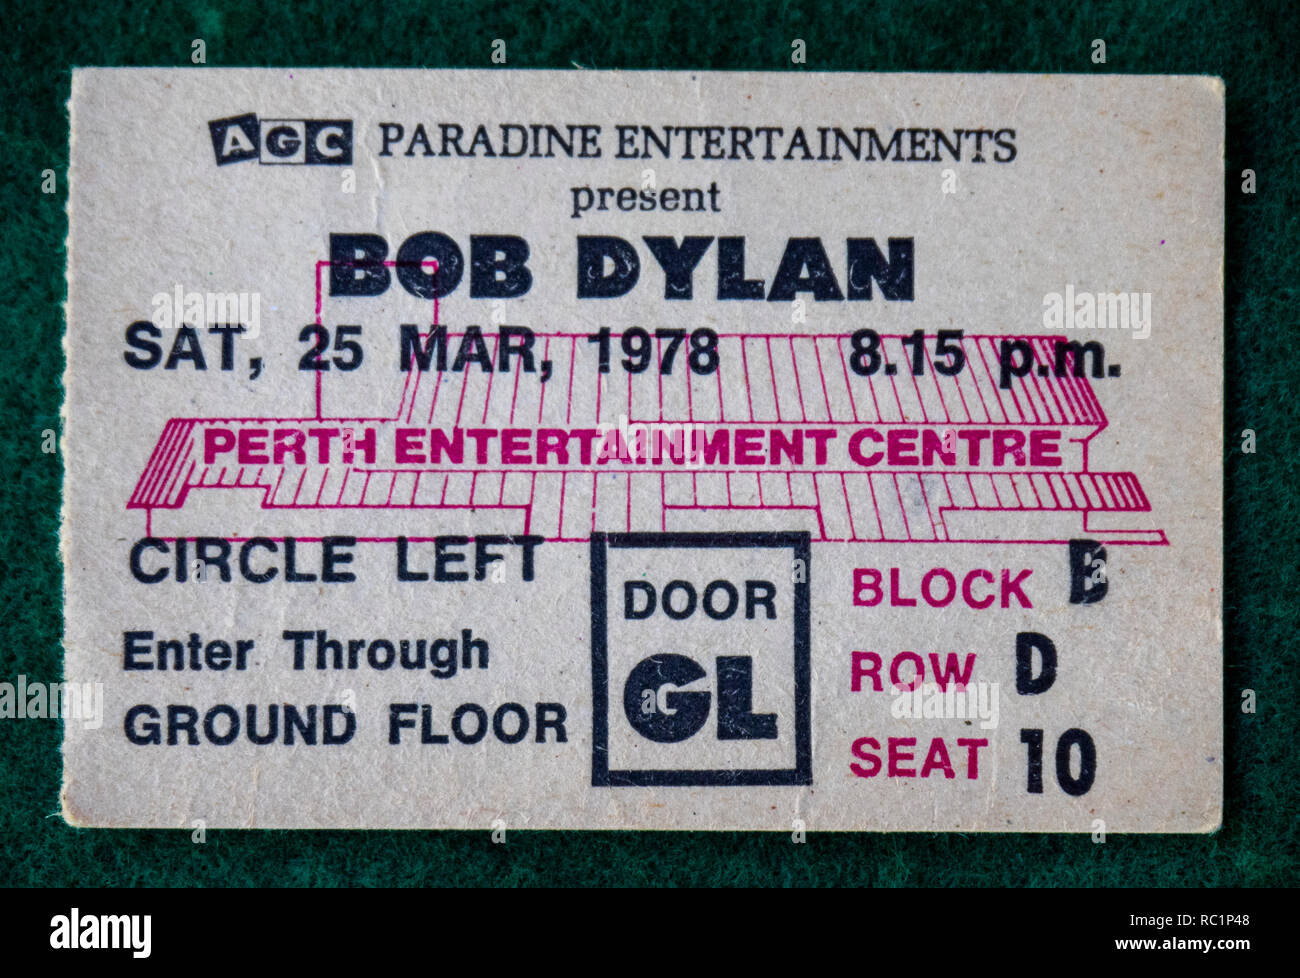 Ticket for Bob Dylan concert at Perth Entertainment Centre in 1978 WA Australia. Stock Photo